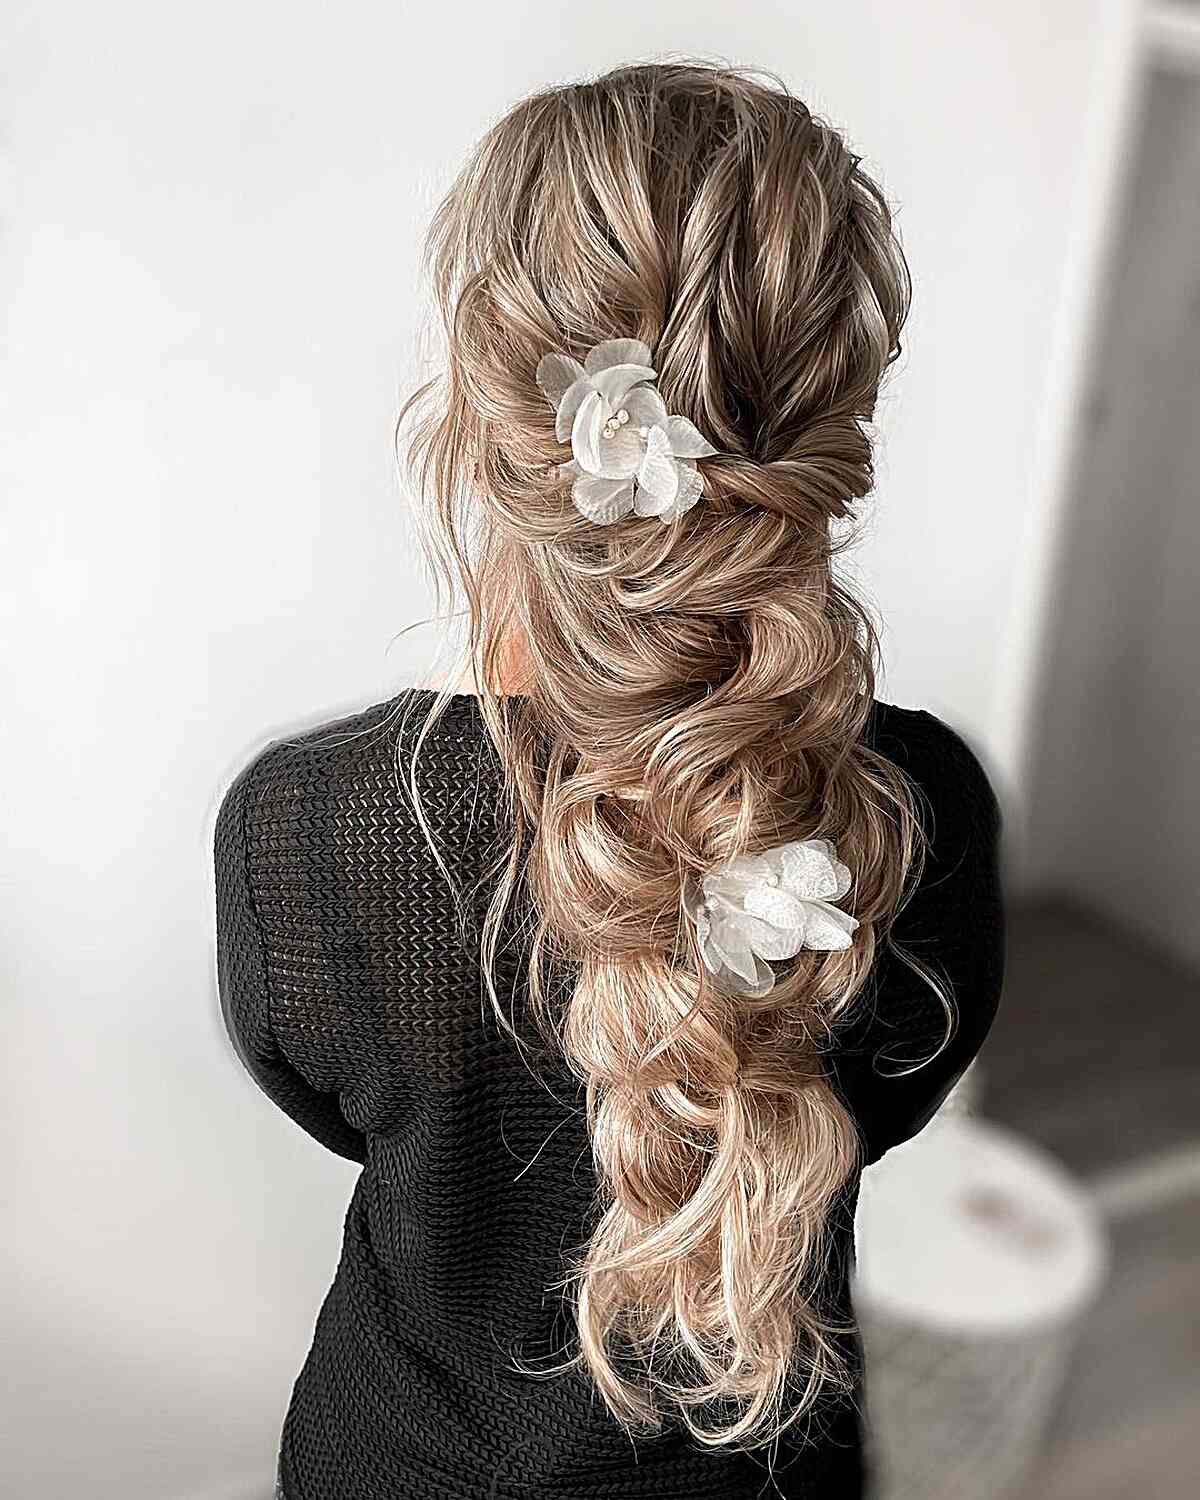 Romantic and Dreamy Boho Hair with flowers for a bridesmaid